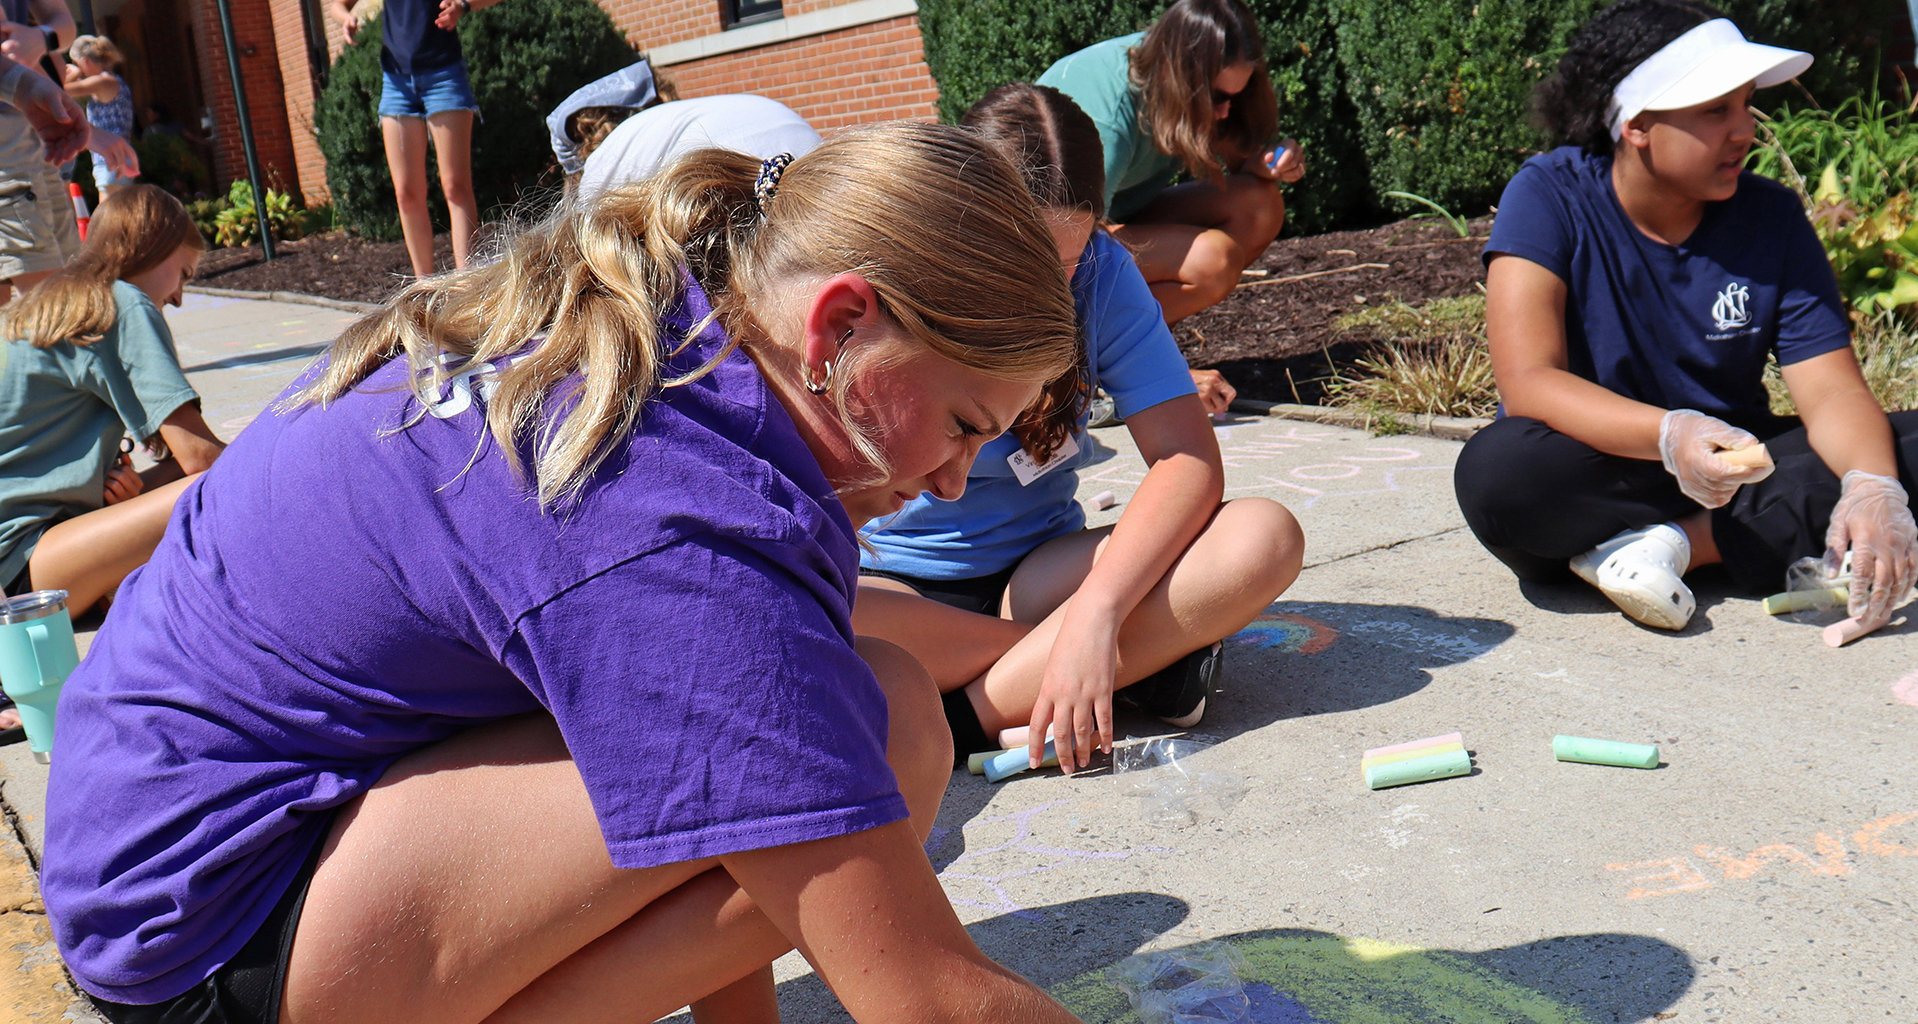 Several students drawing on the sidewalk with chalk